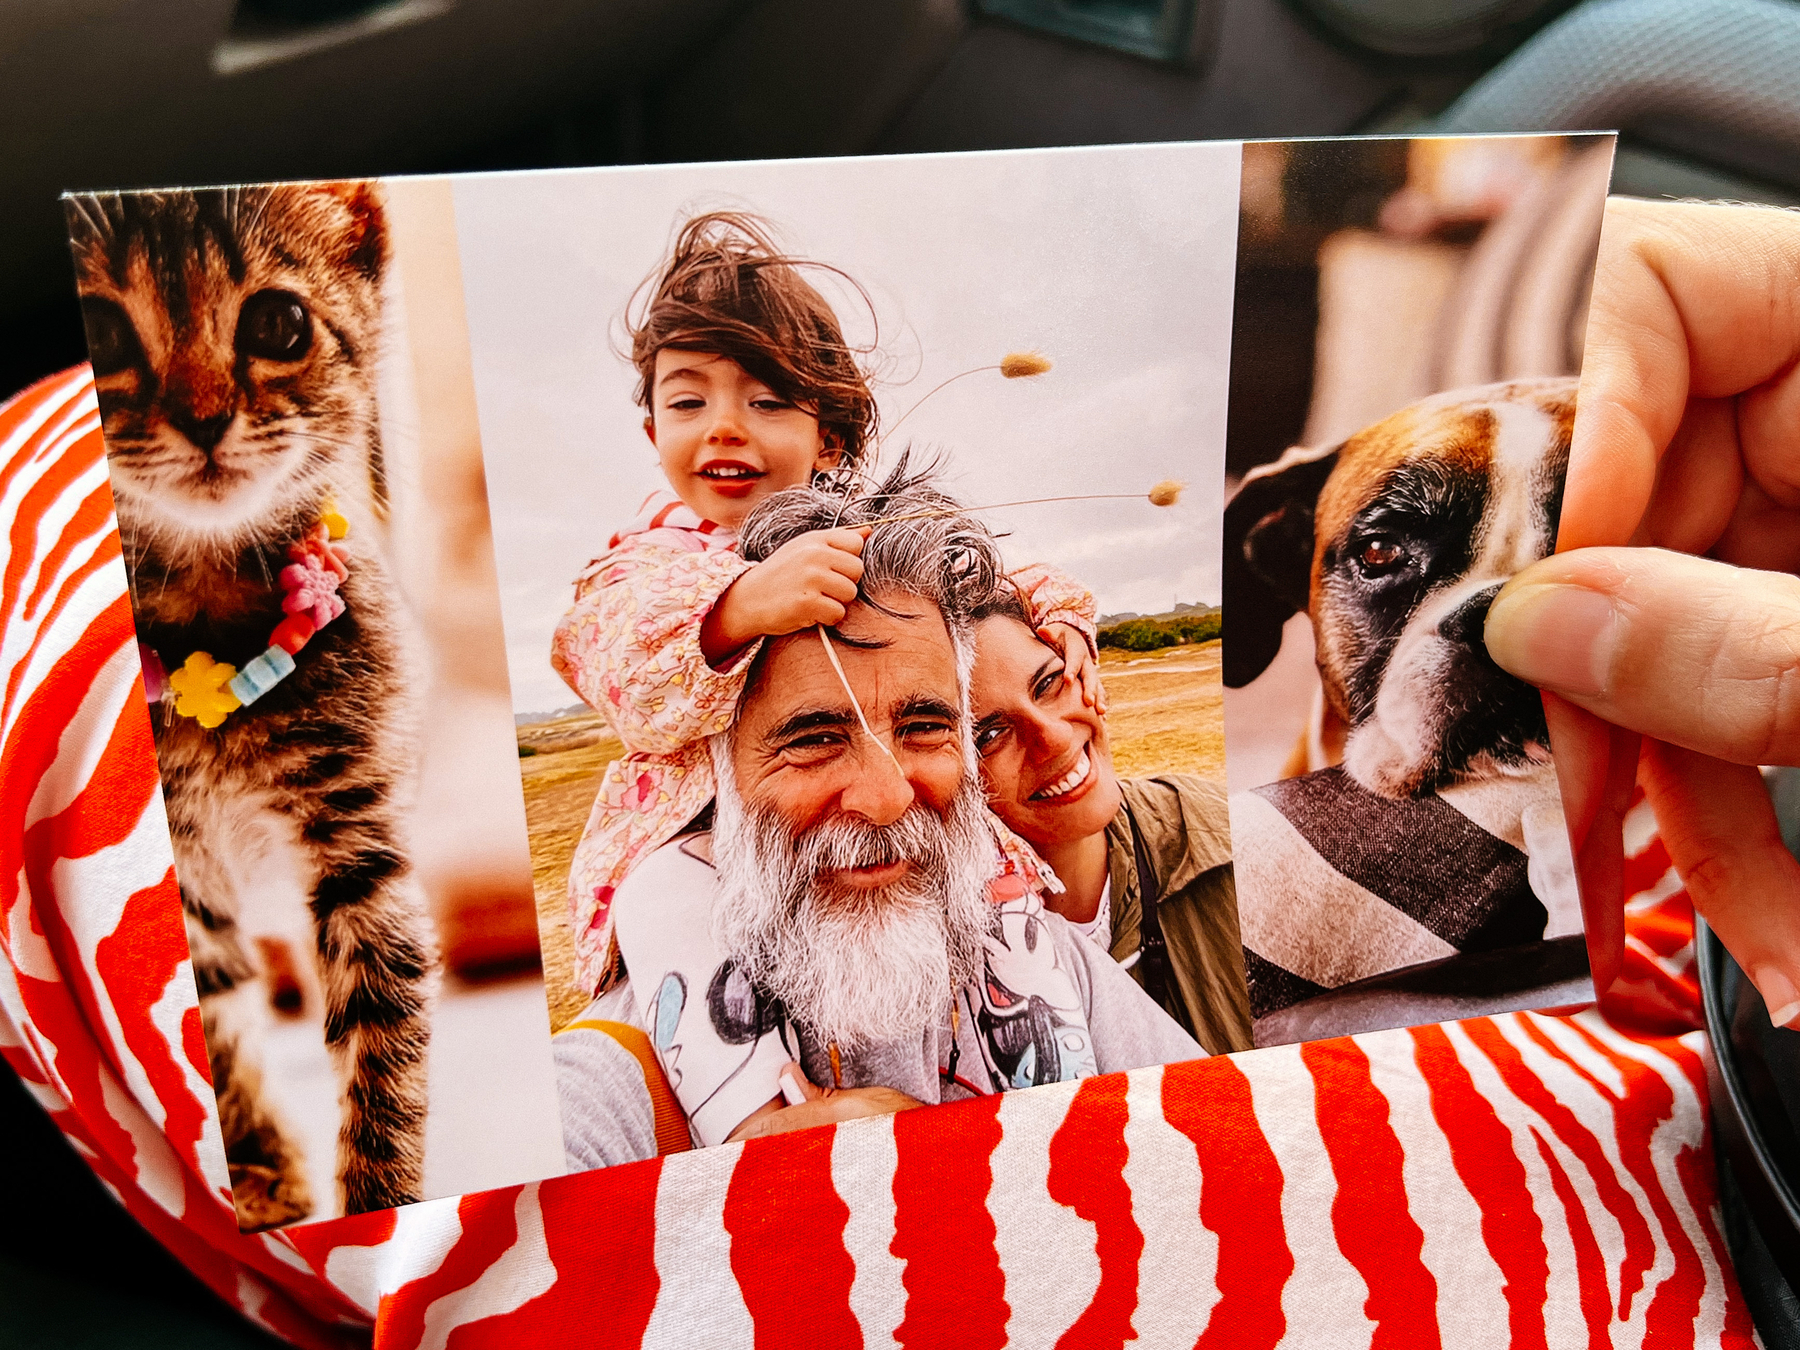 a photo of a happy family. To the left, a photo of a cat and, to the right, a dog is shown